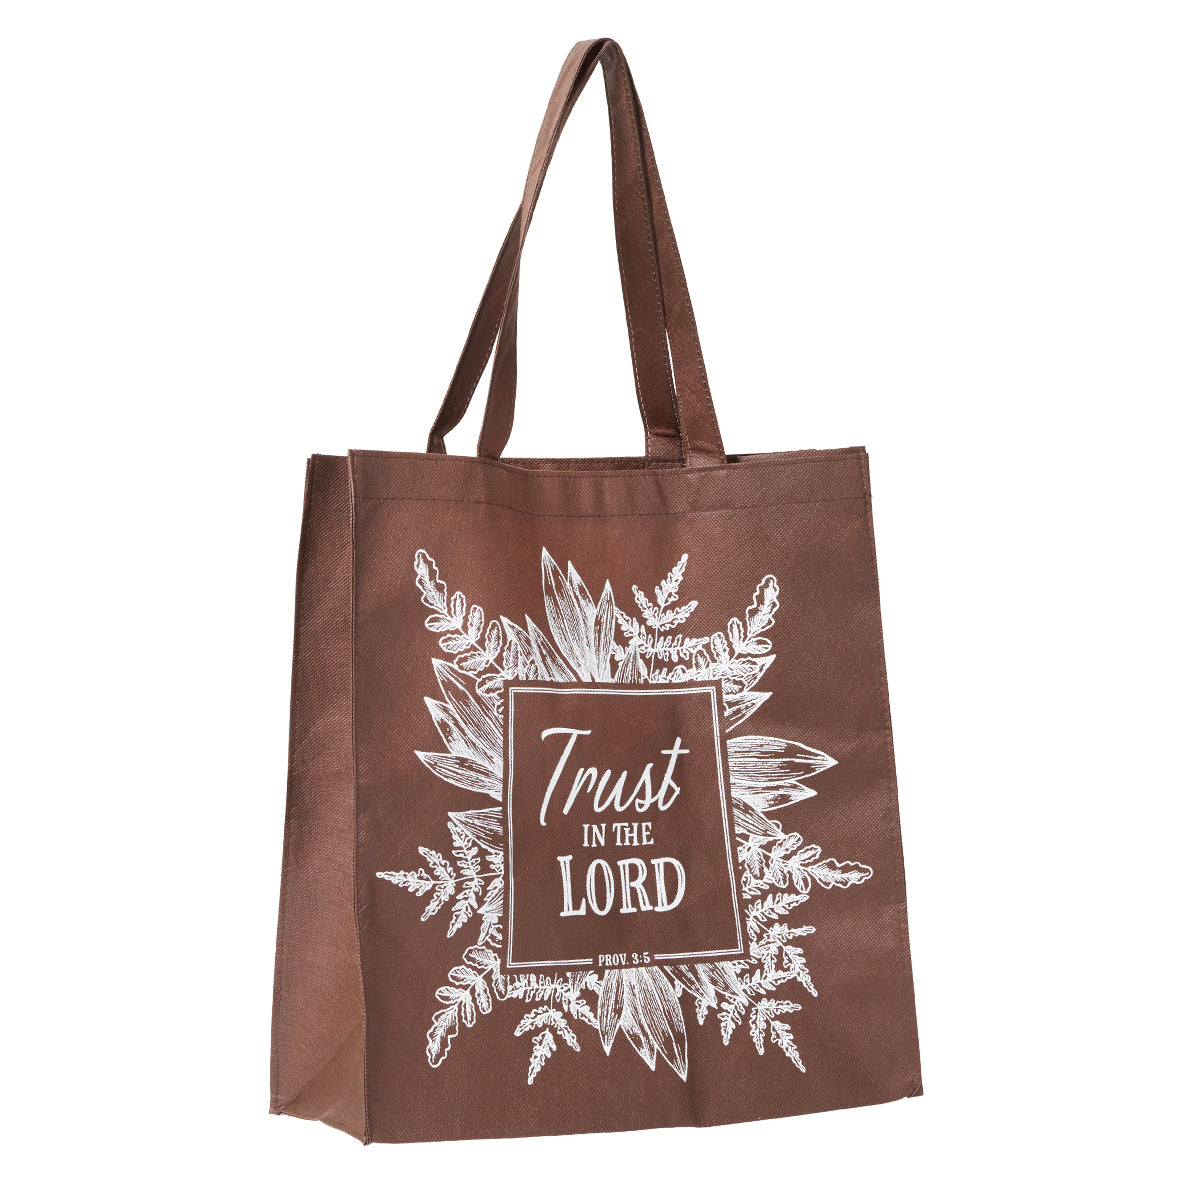 Trust In The Lord Brown Tote Bag - Proverbs 3:5 - The Christian Gift Company